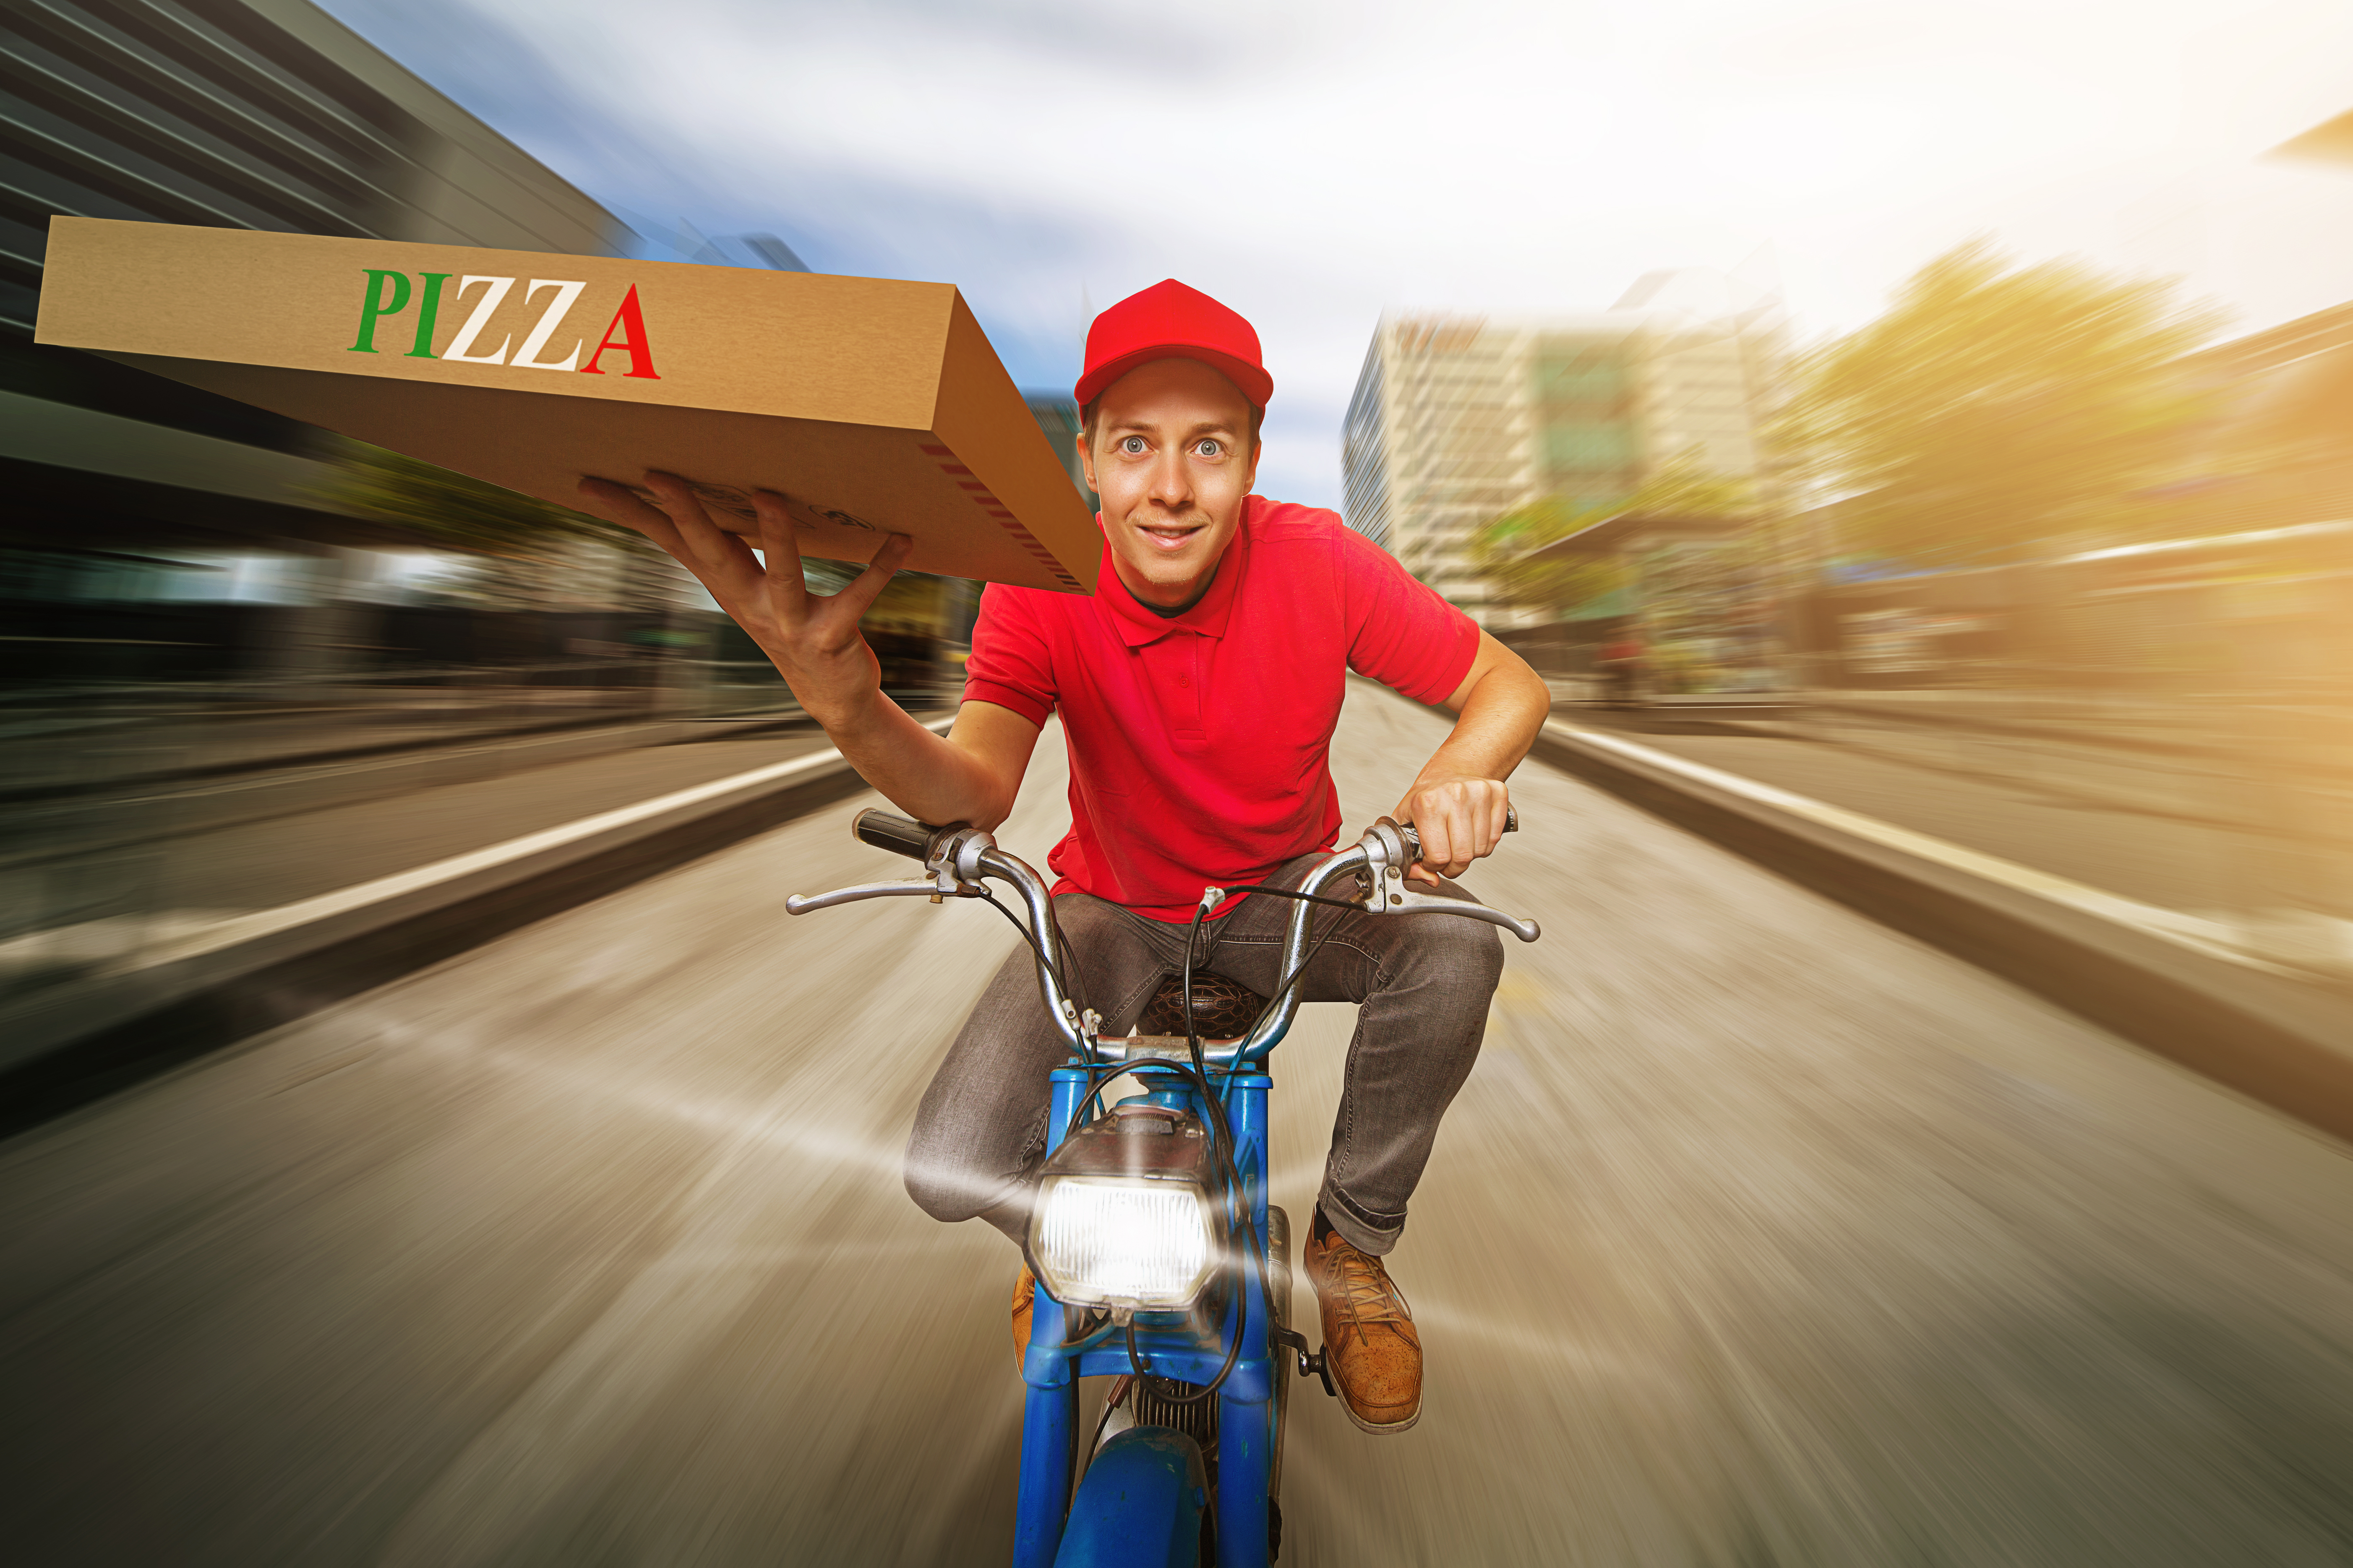 A pizza delivery driver speeding down a road | Source: Shutterstock